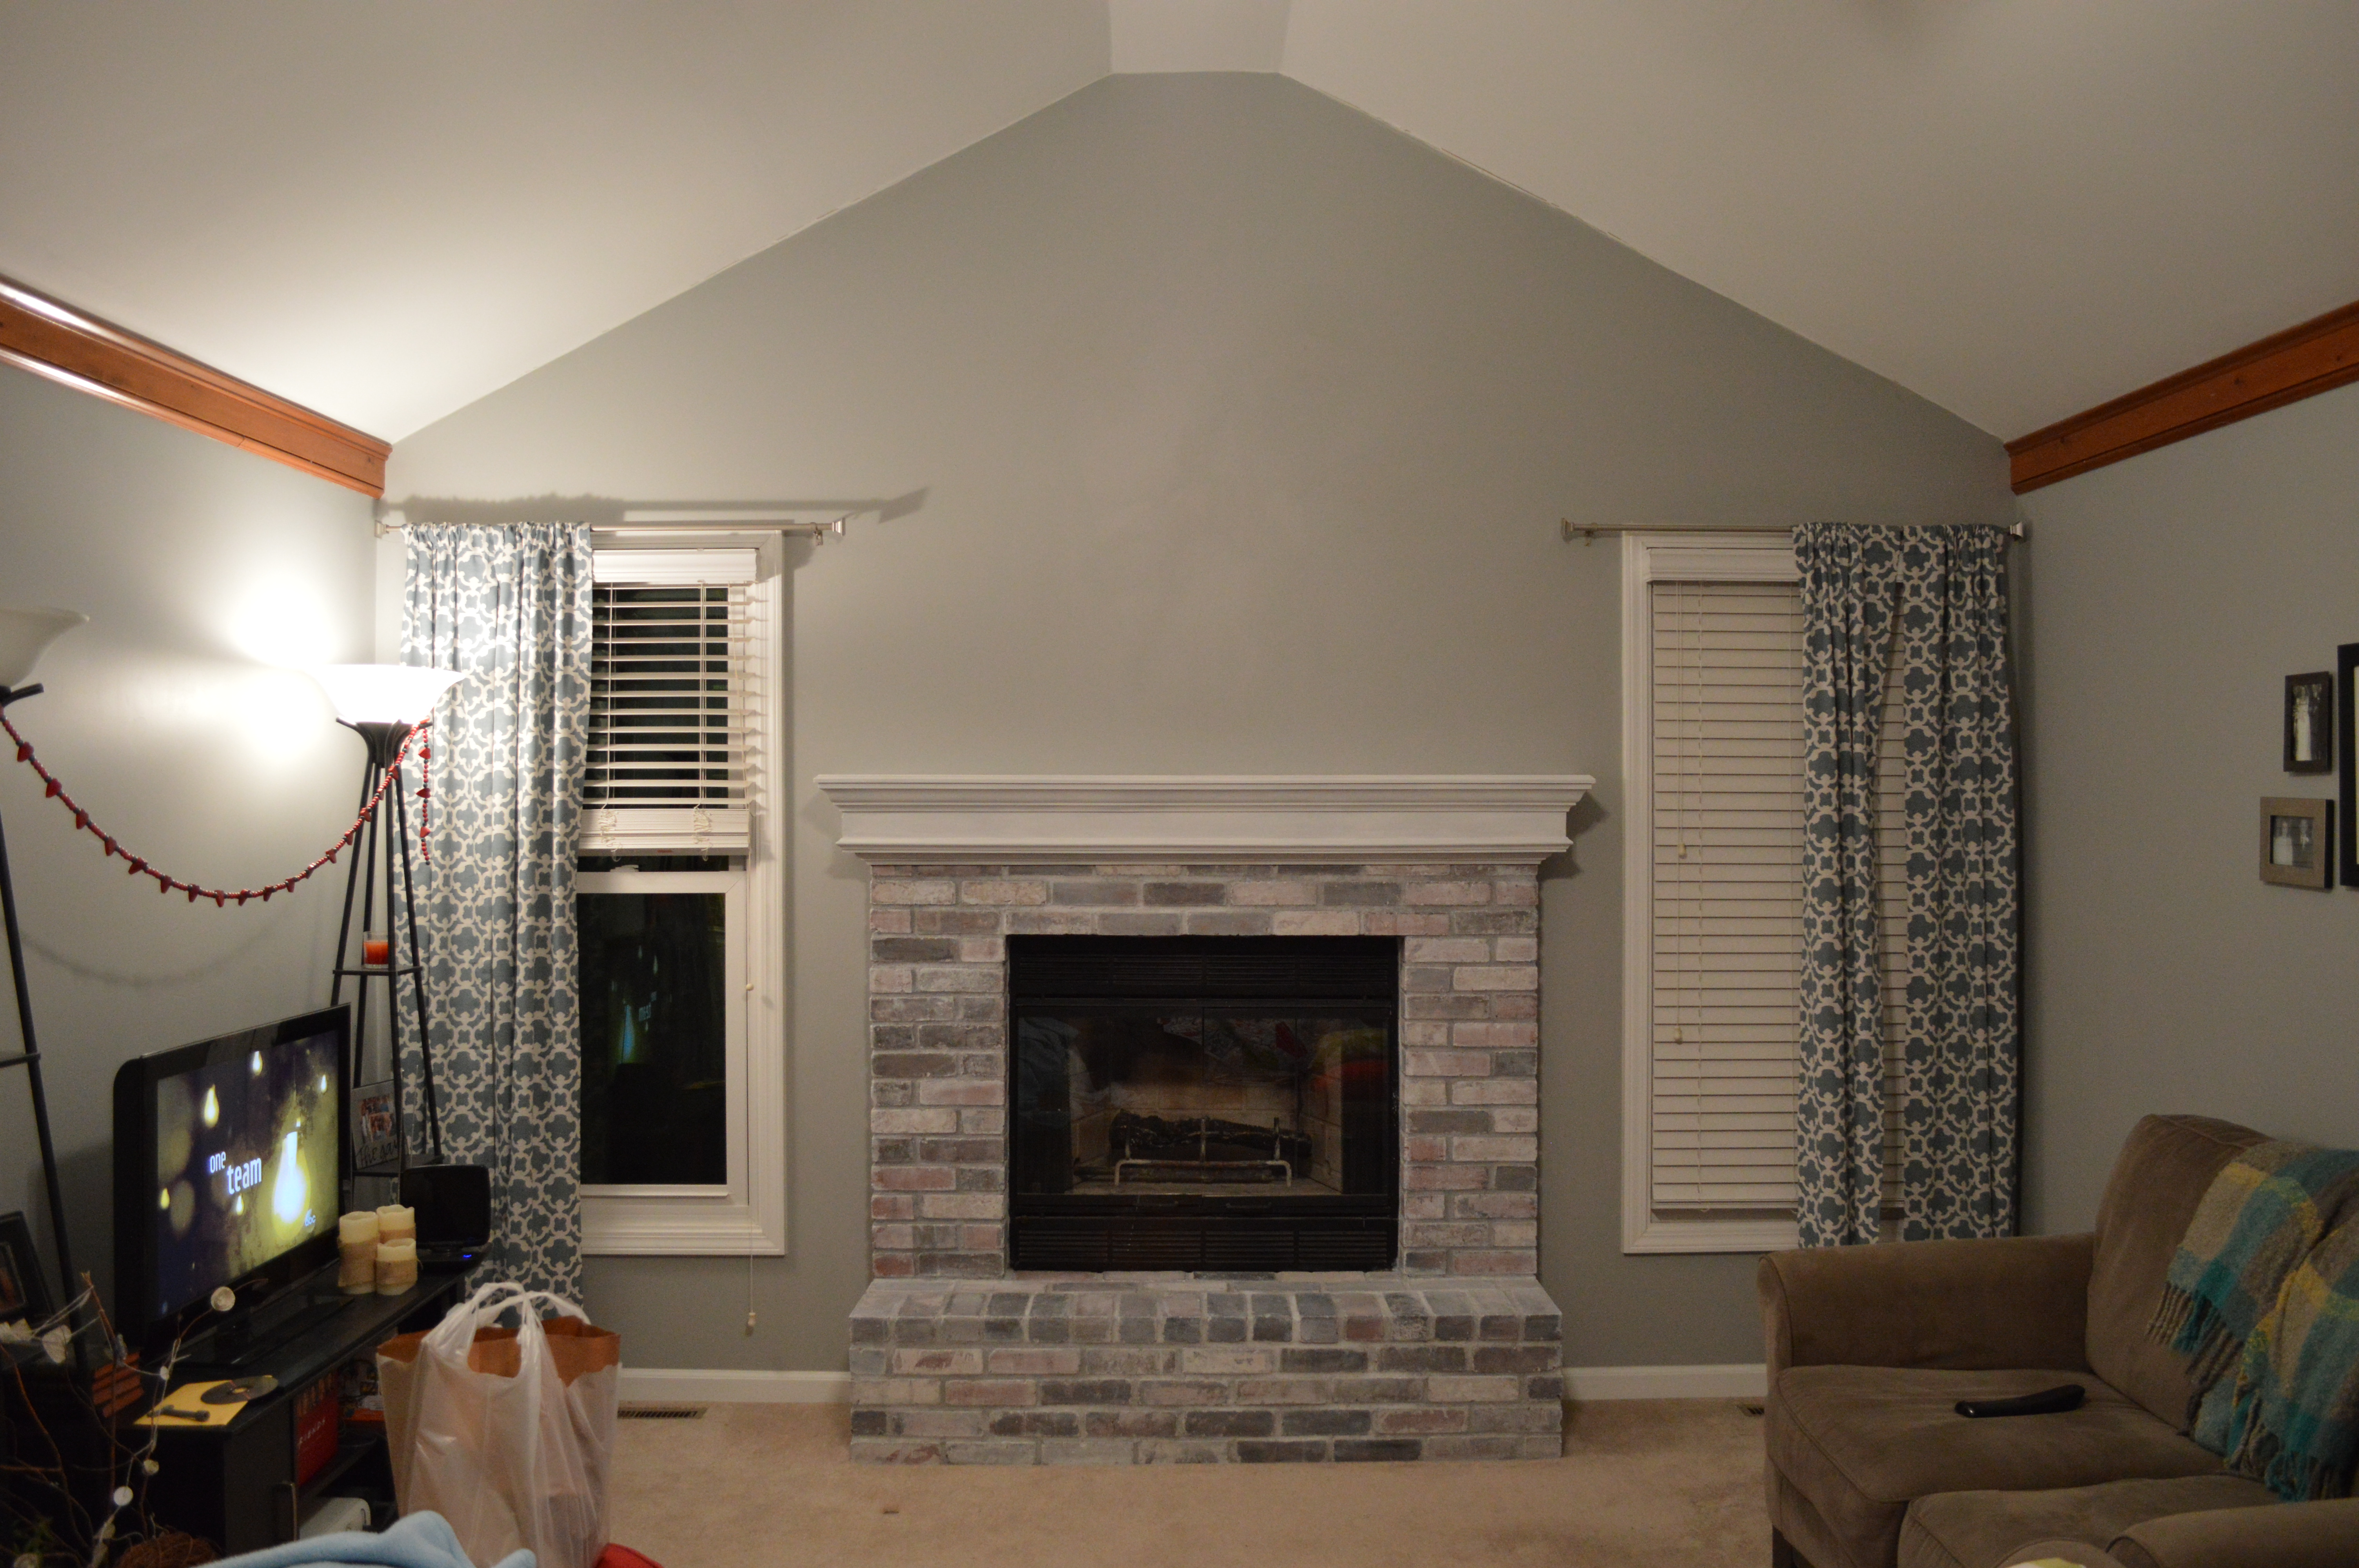 The ultimate step-by-step tutorial for how to whitewash brick and transform a dated fireplace with an easy